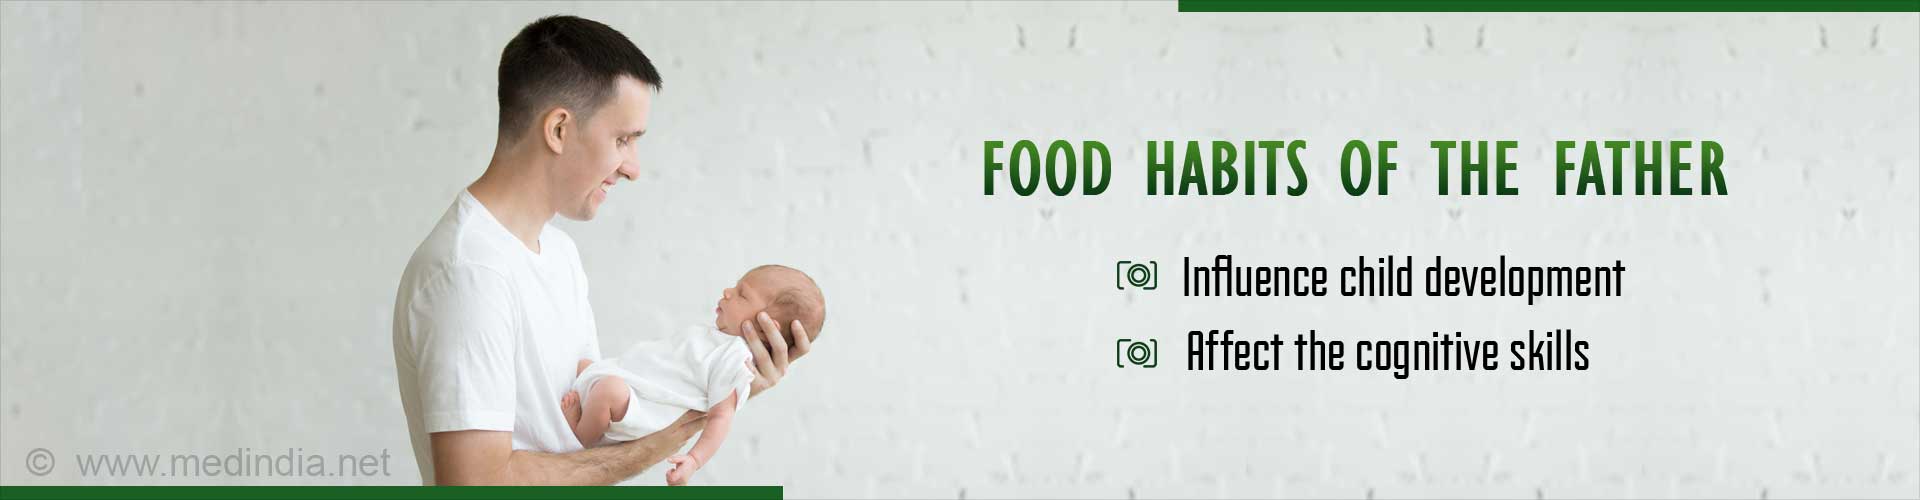 Food habits of the father
- influence child development
- affect the cognitive skills